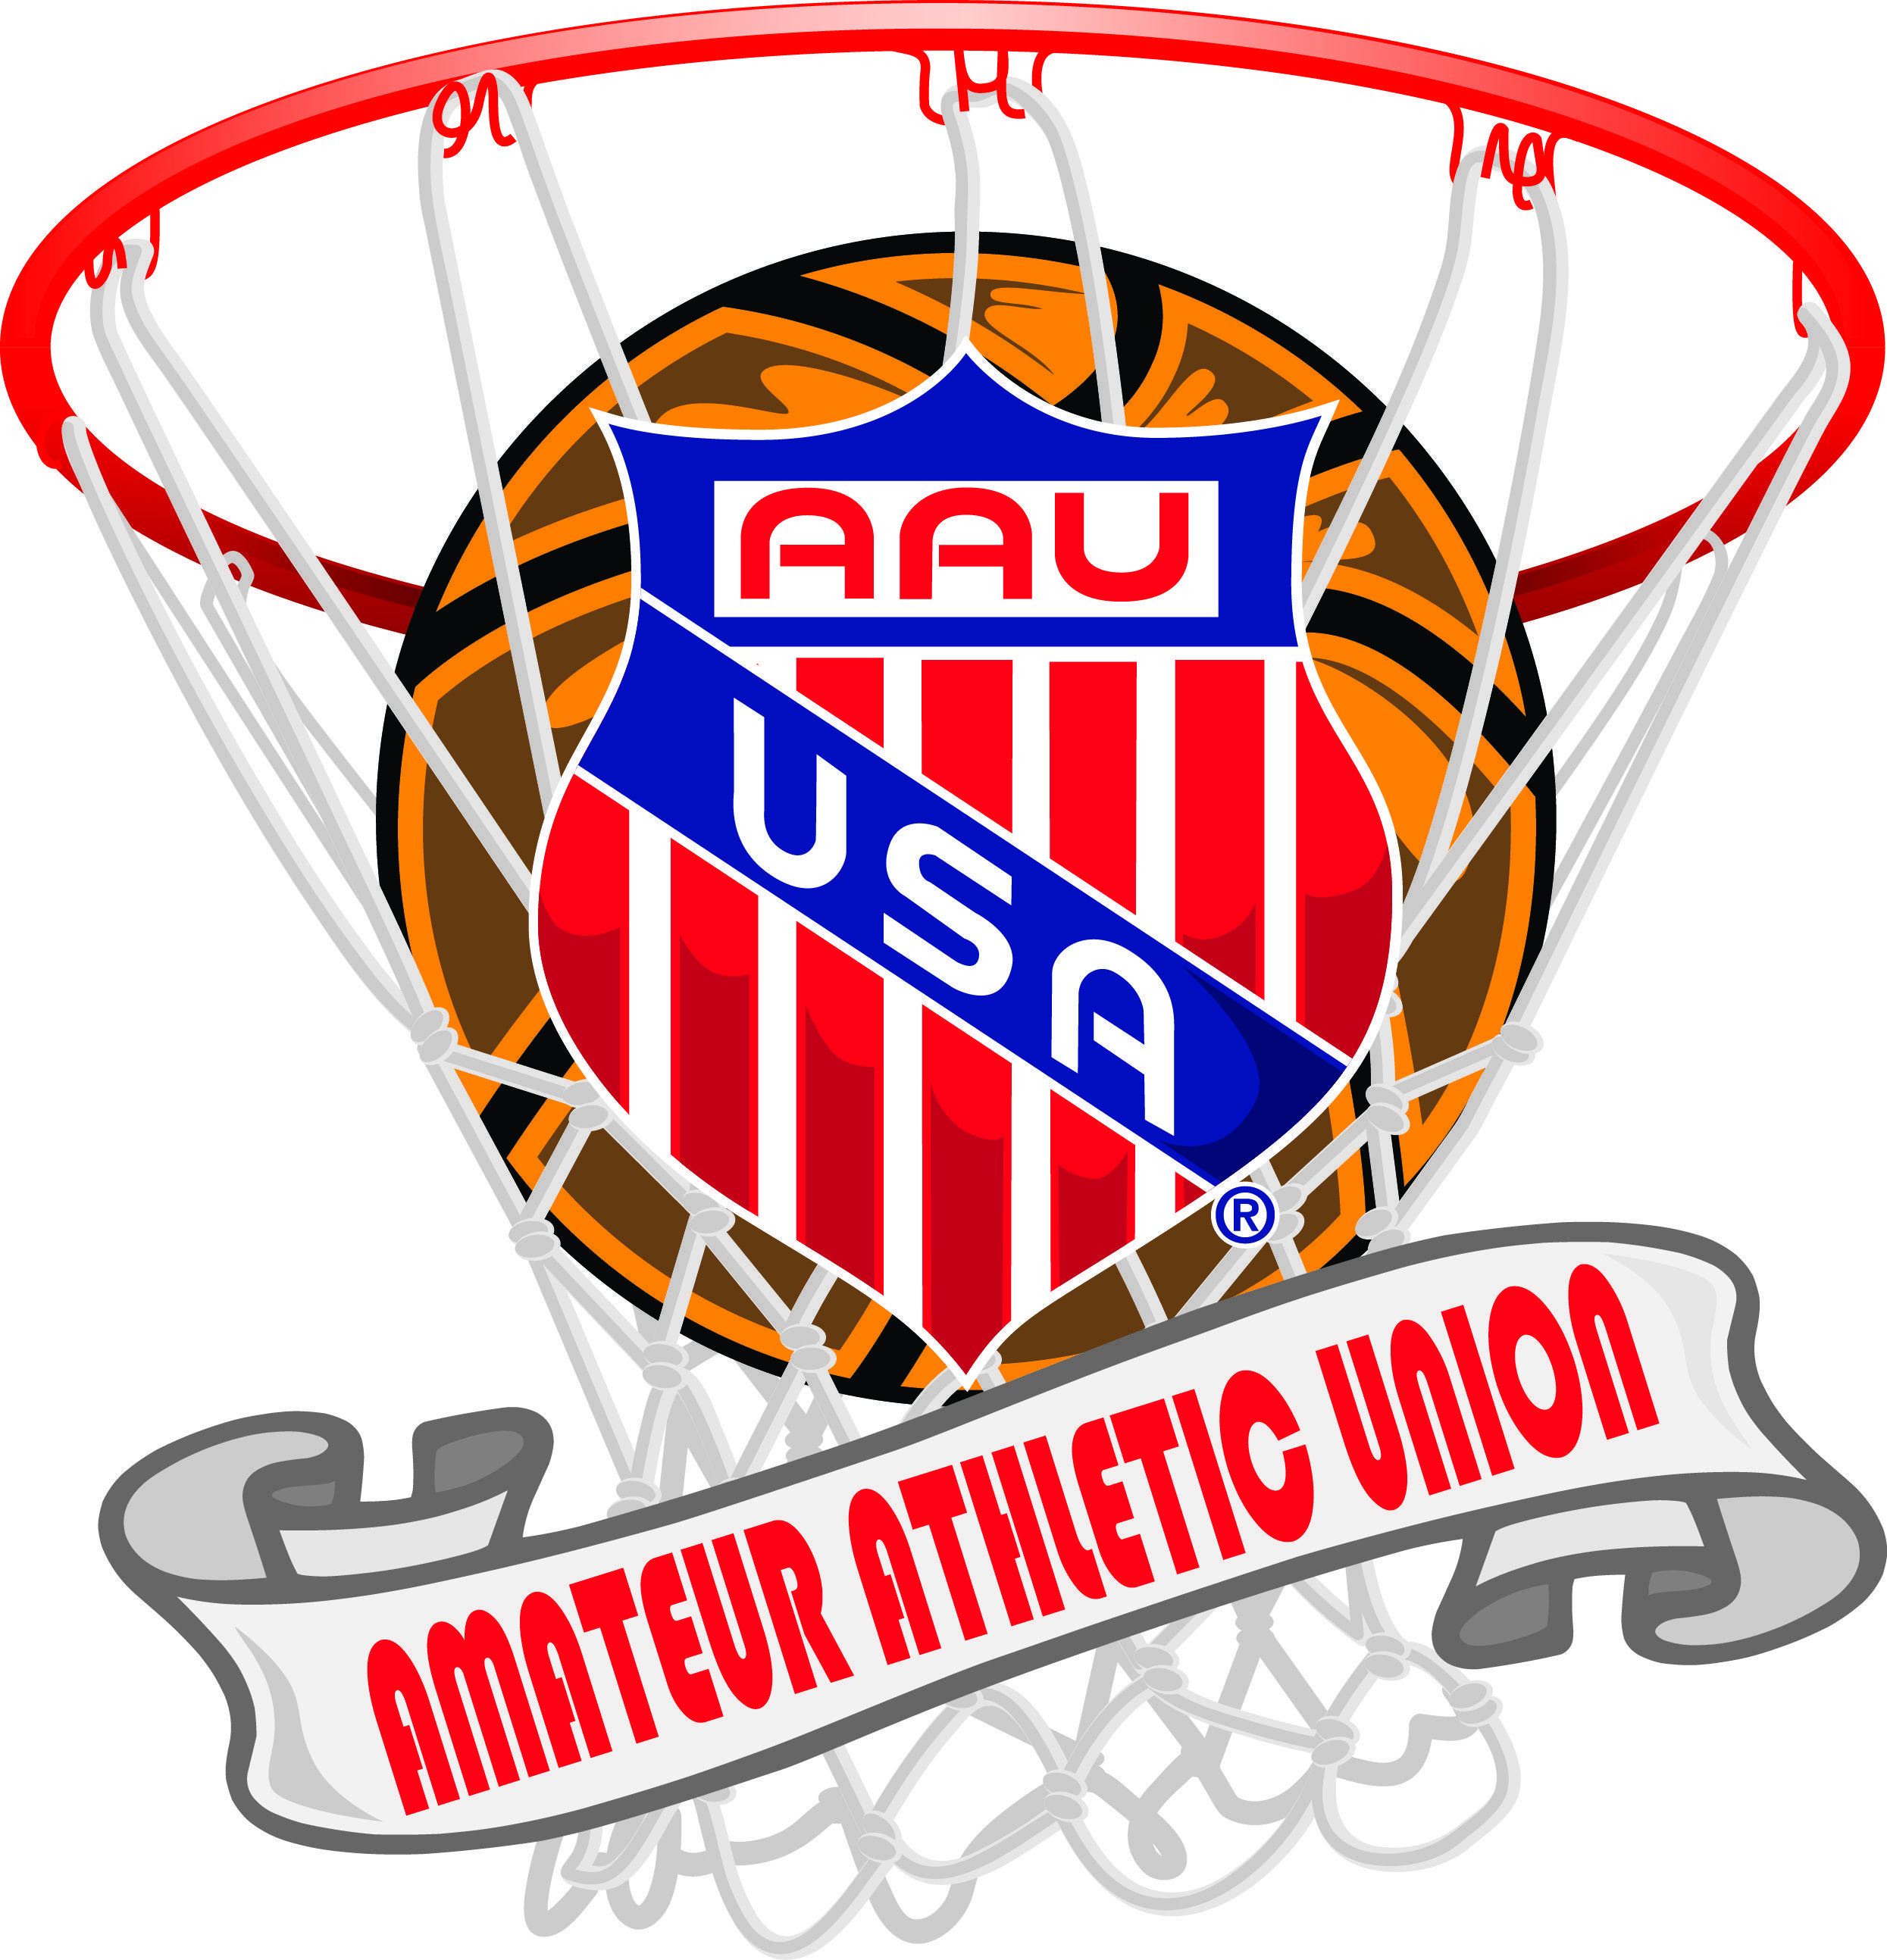 Elite Basketball Logo - How to Join AAU